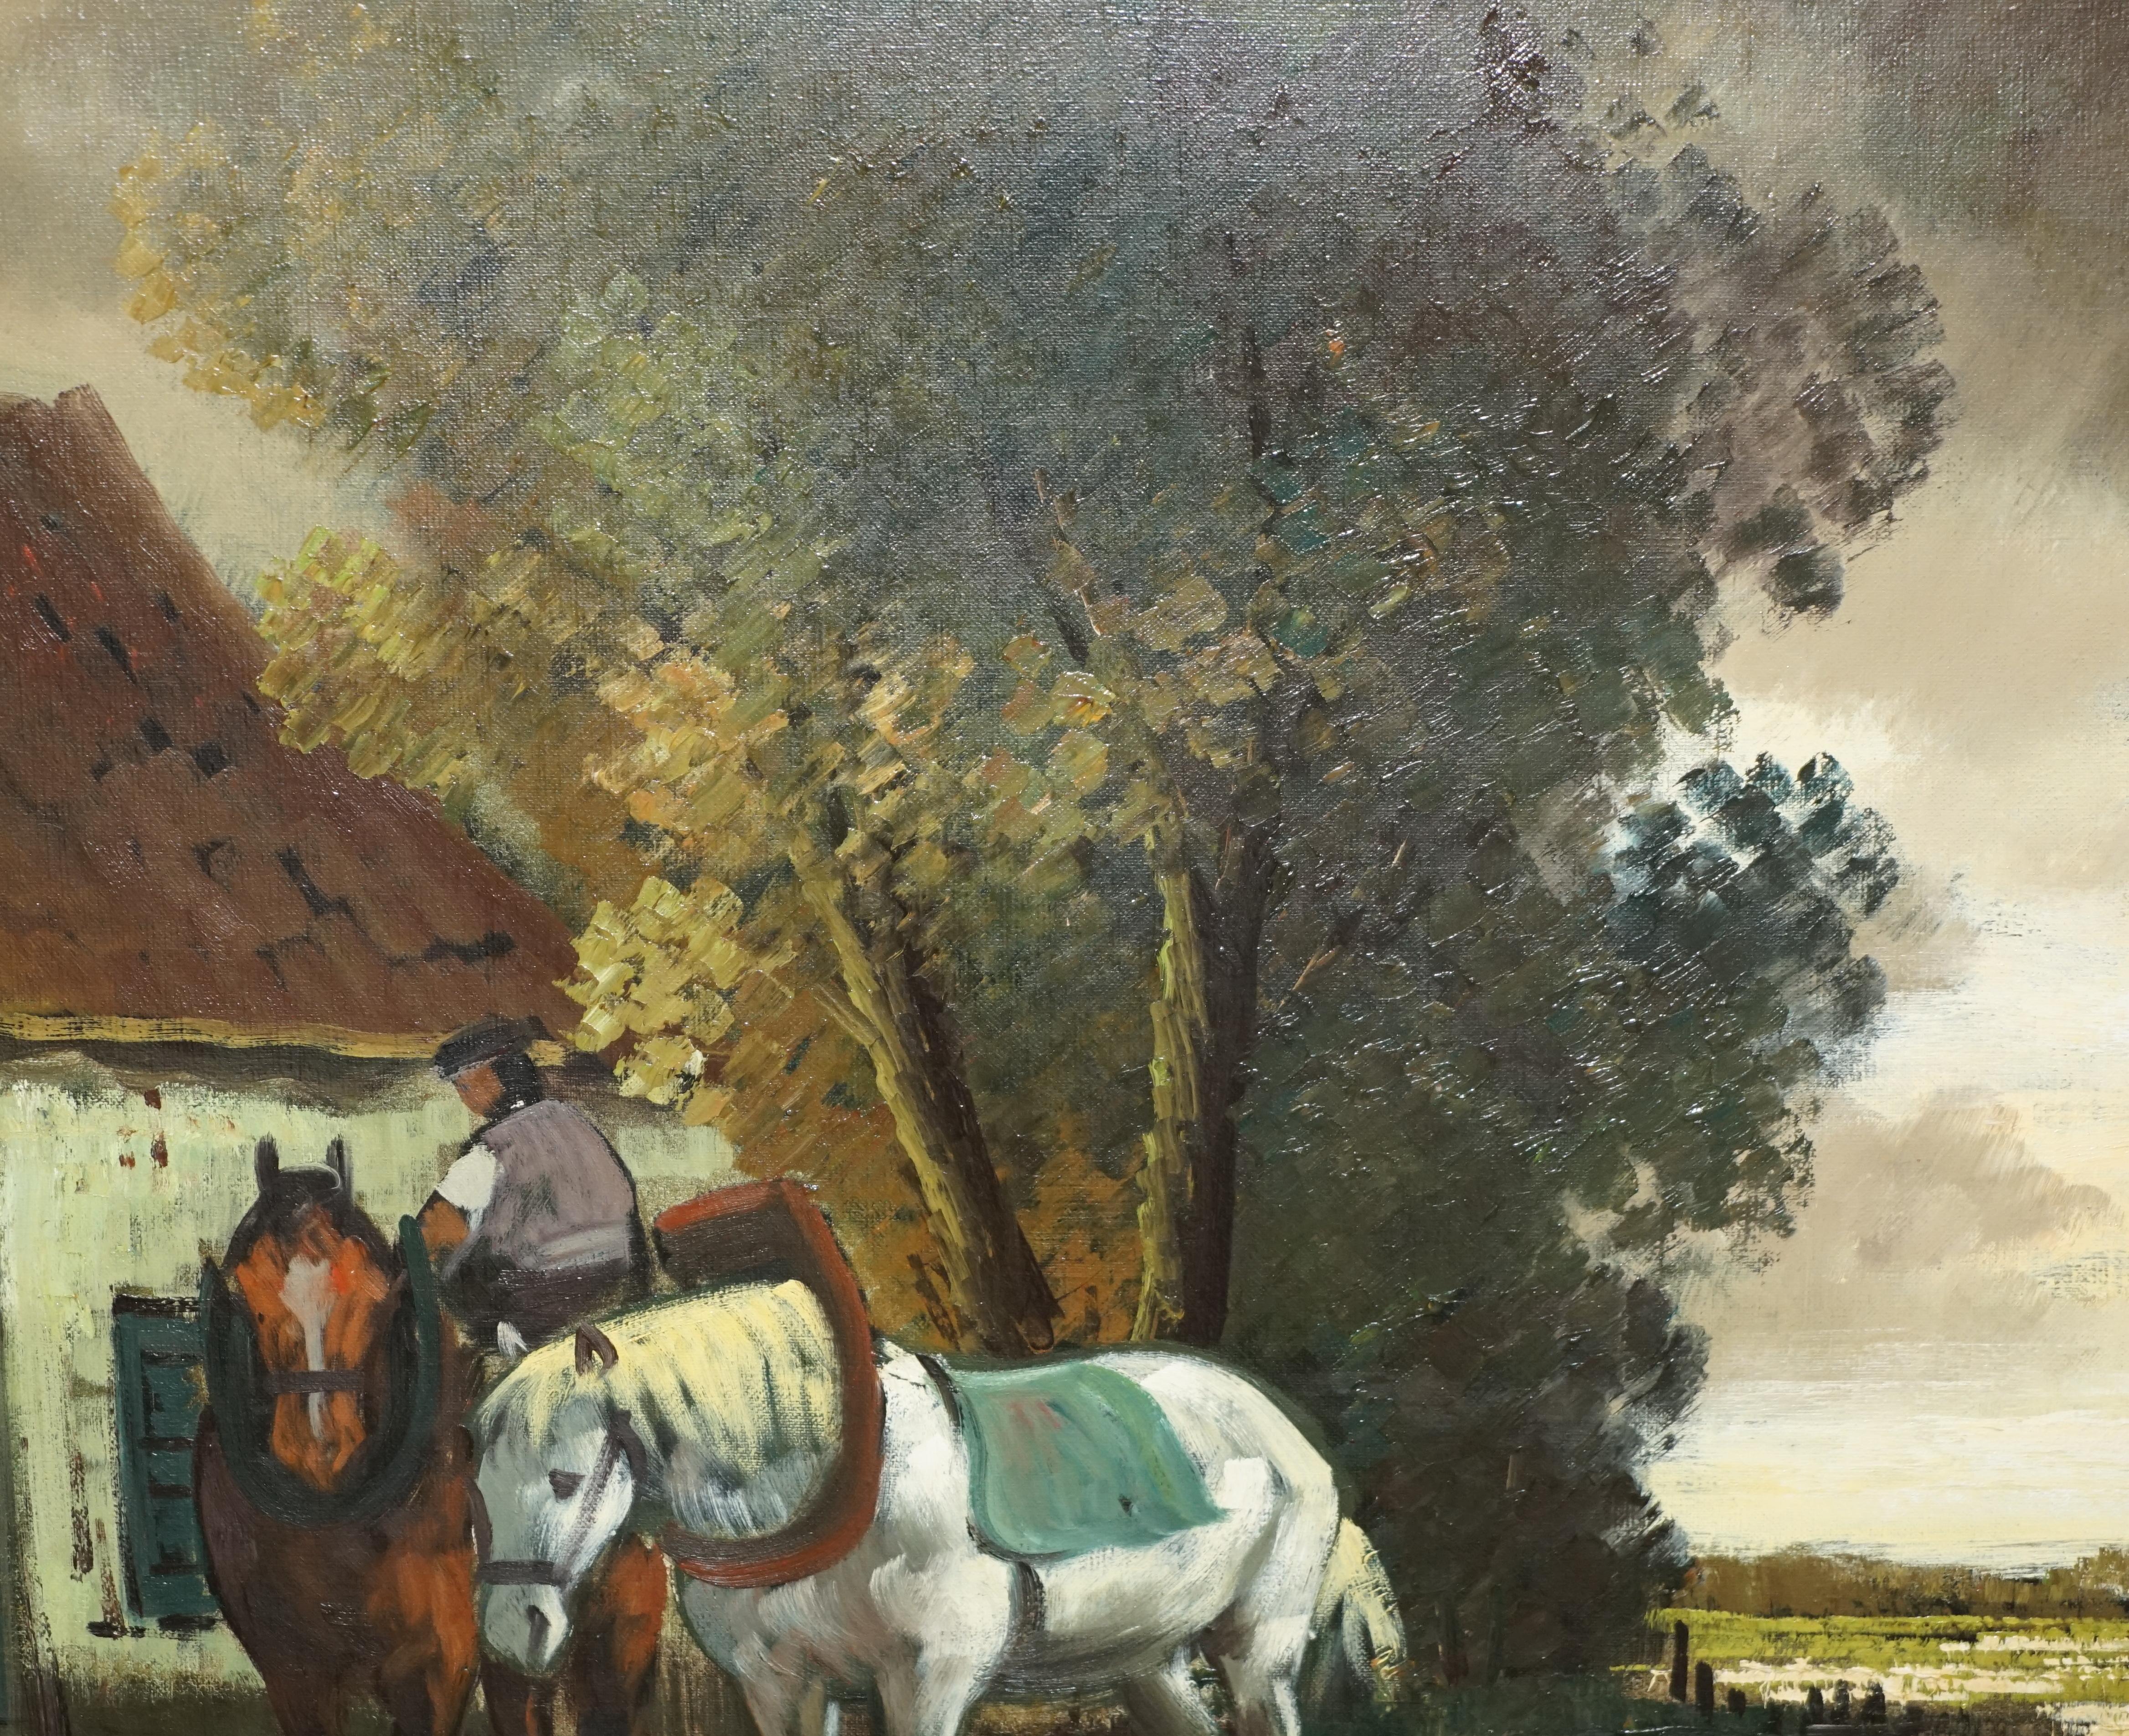 EXTRA LARGE 159X94CM H. VERBEELK SiGNED OIL PAINTING OF A RURAL SCENE WITH HORSE For Sale 6